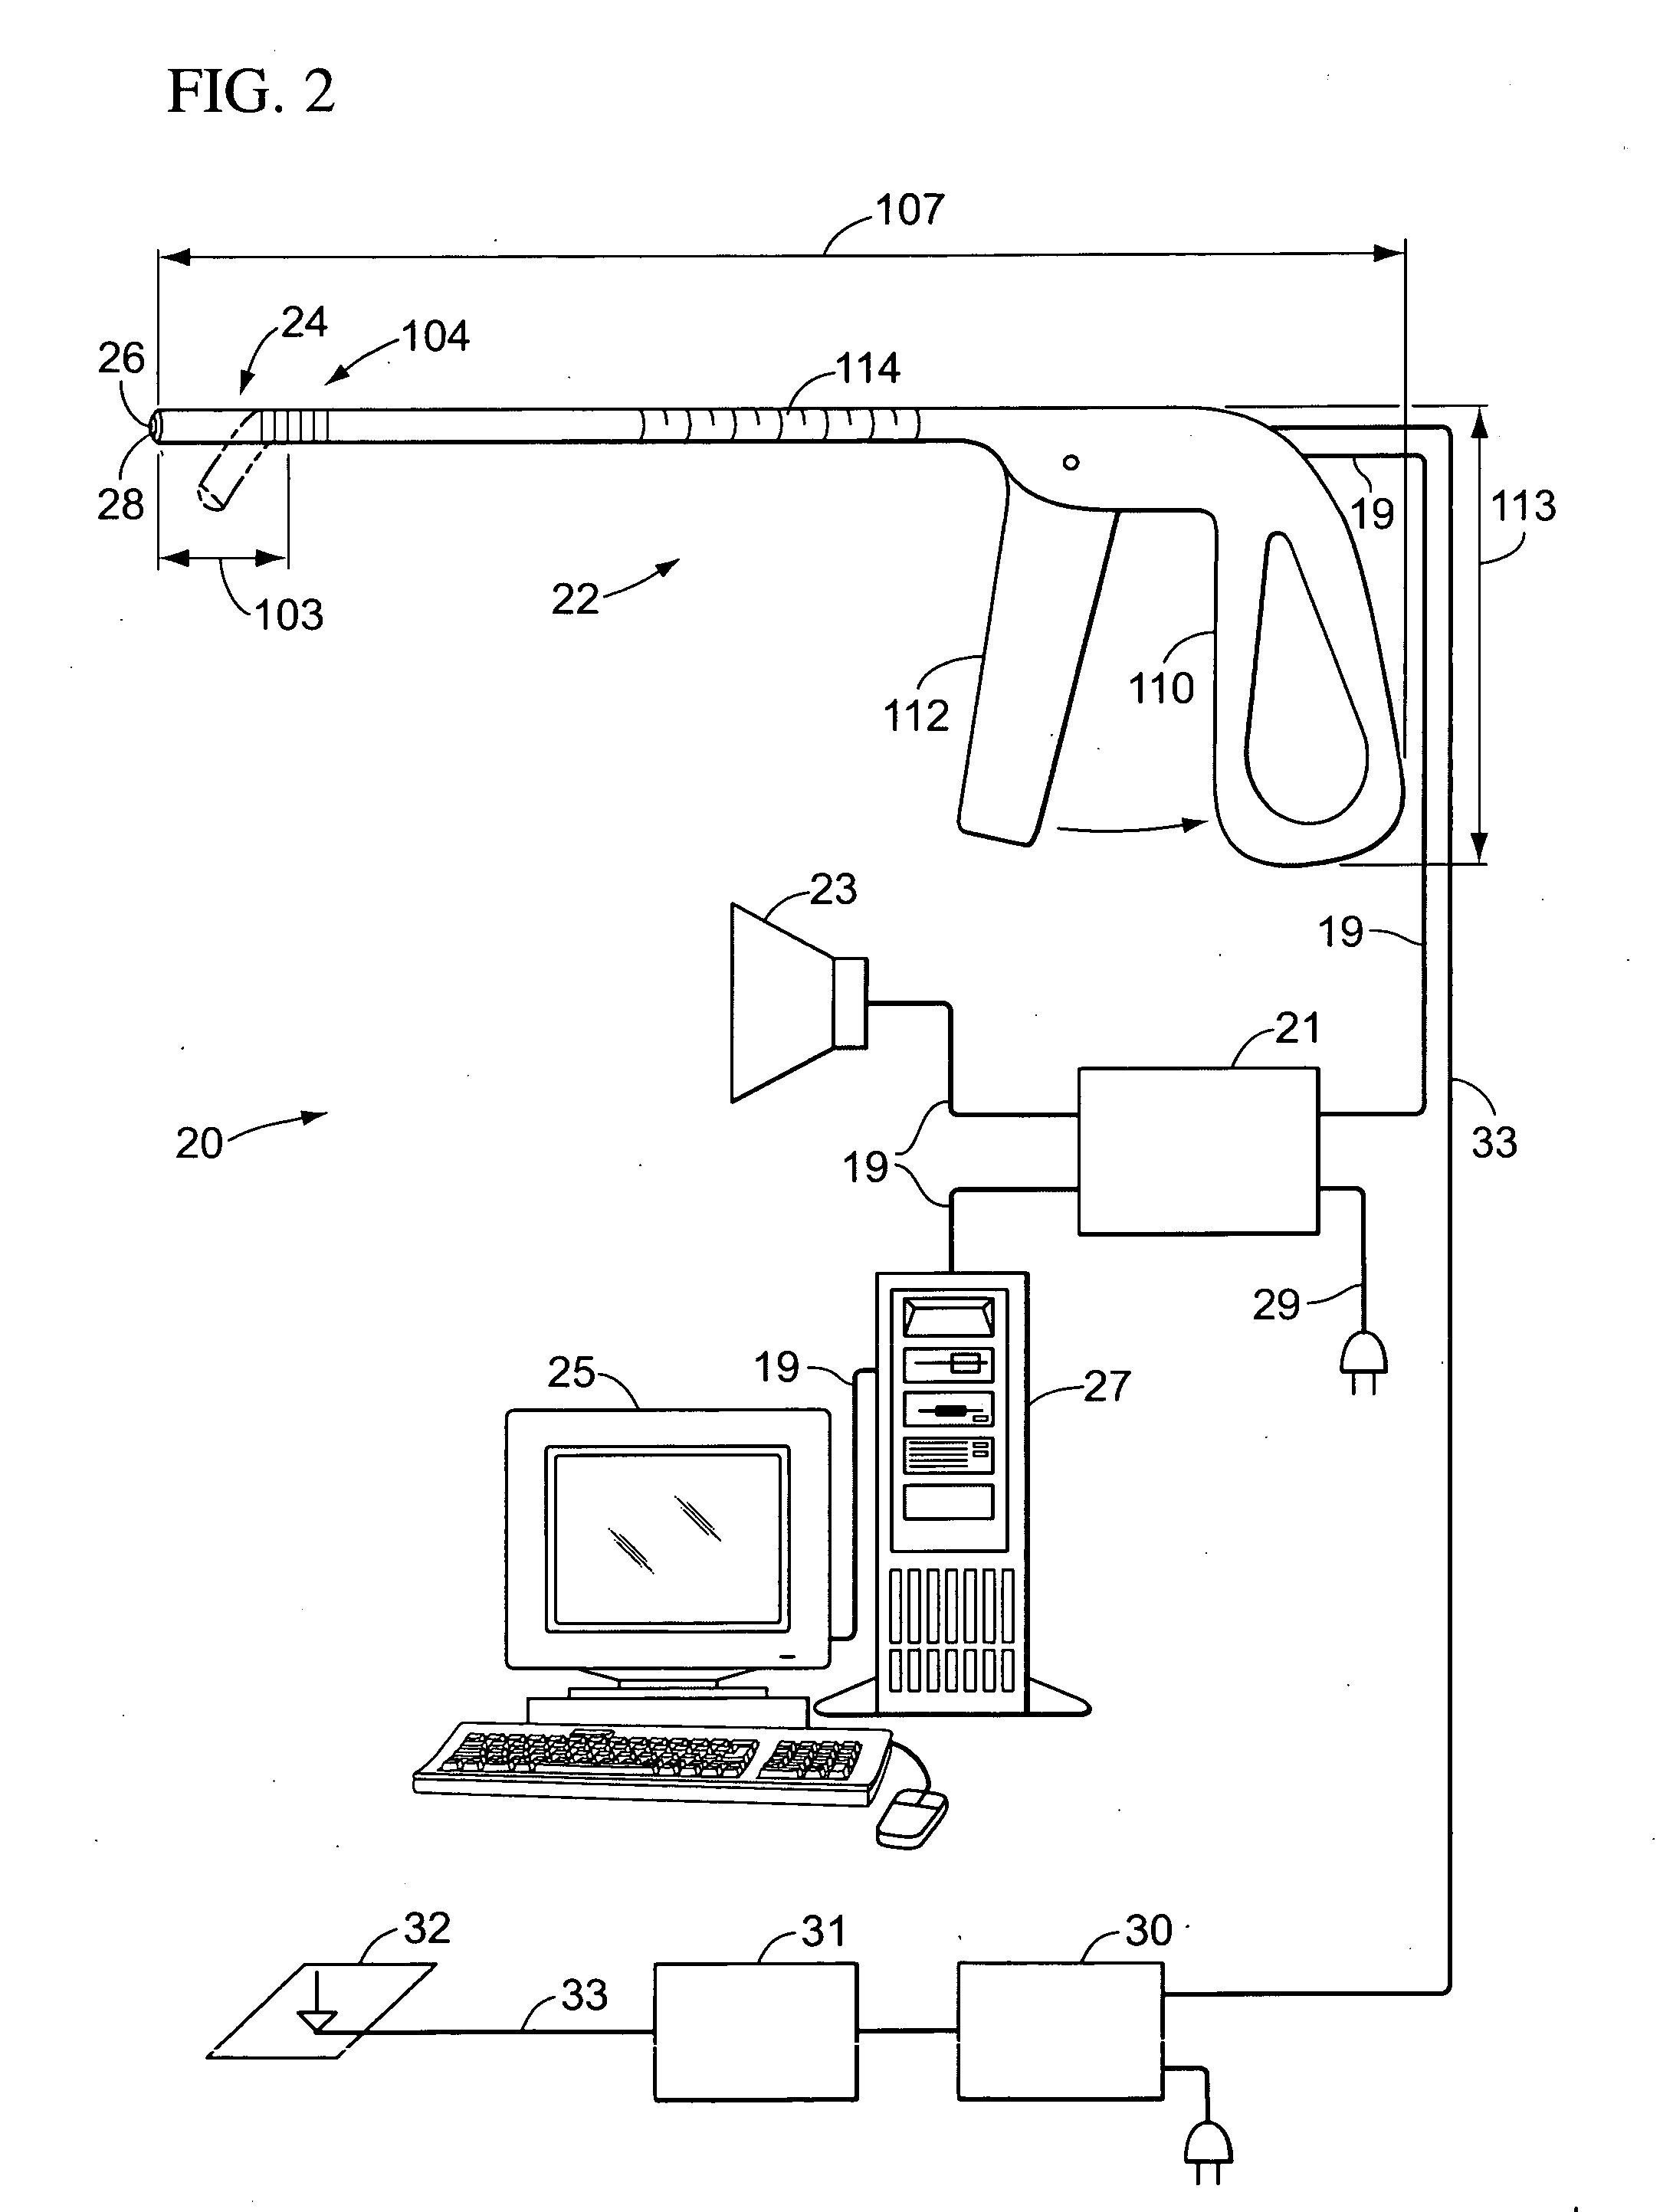 Method and apparatus for monitoring blood flow to the hip joint